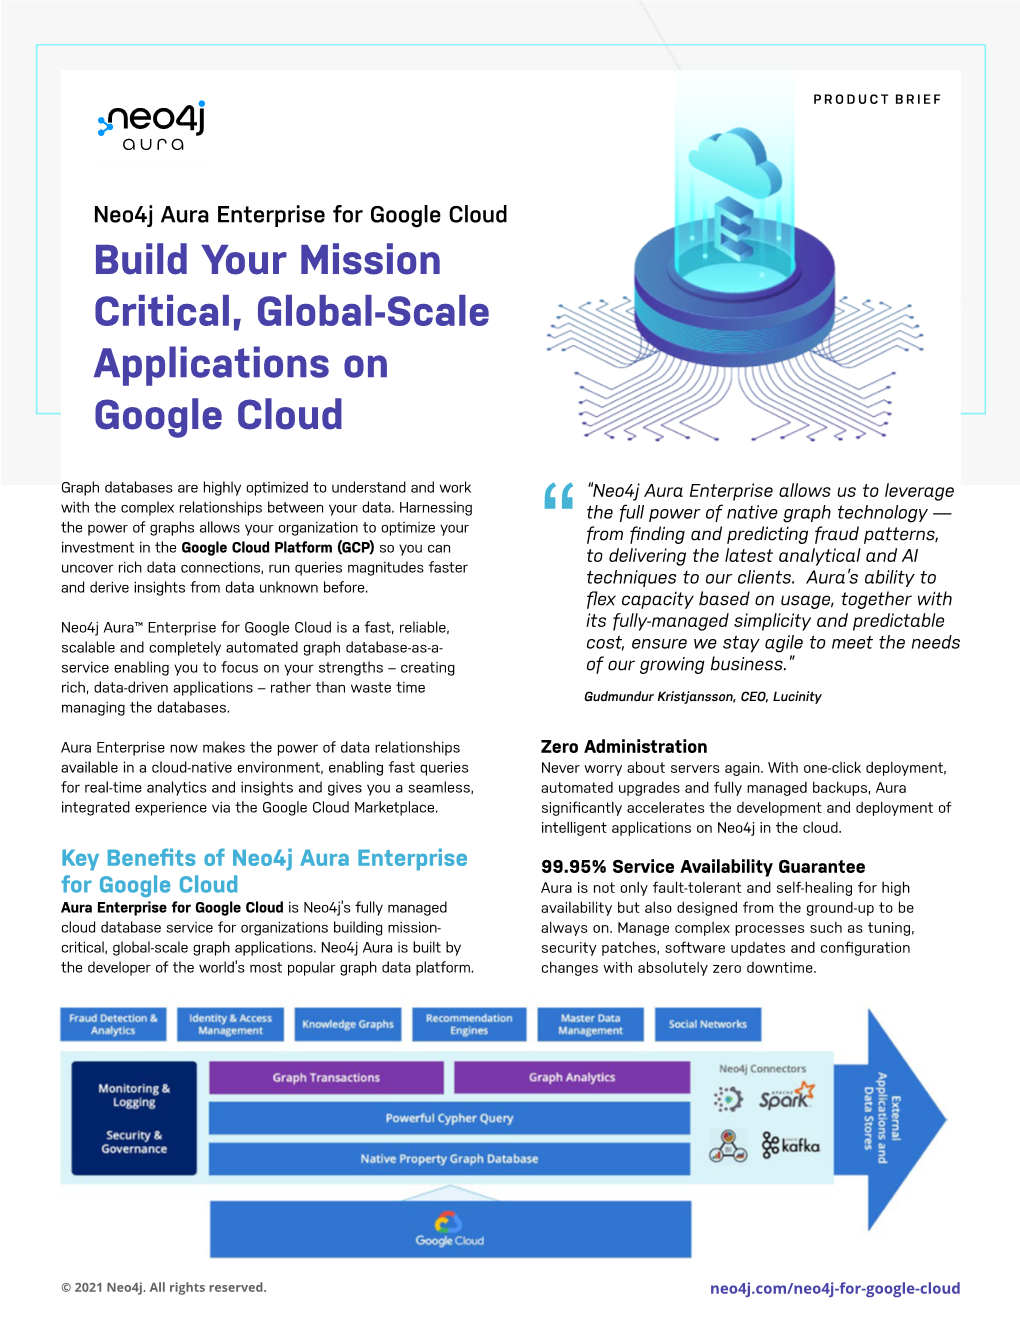 Build Your Mission Critical, Global-Scale Applications on Google Cloud